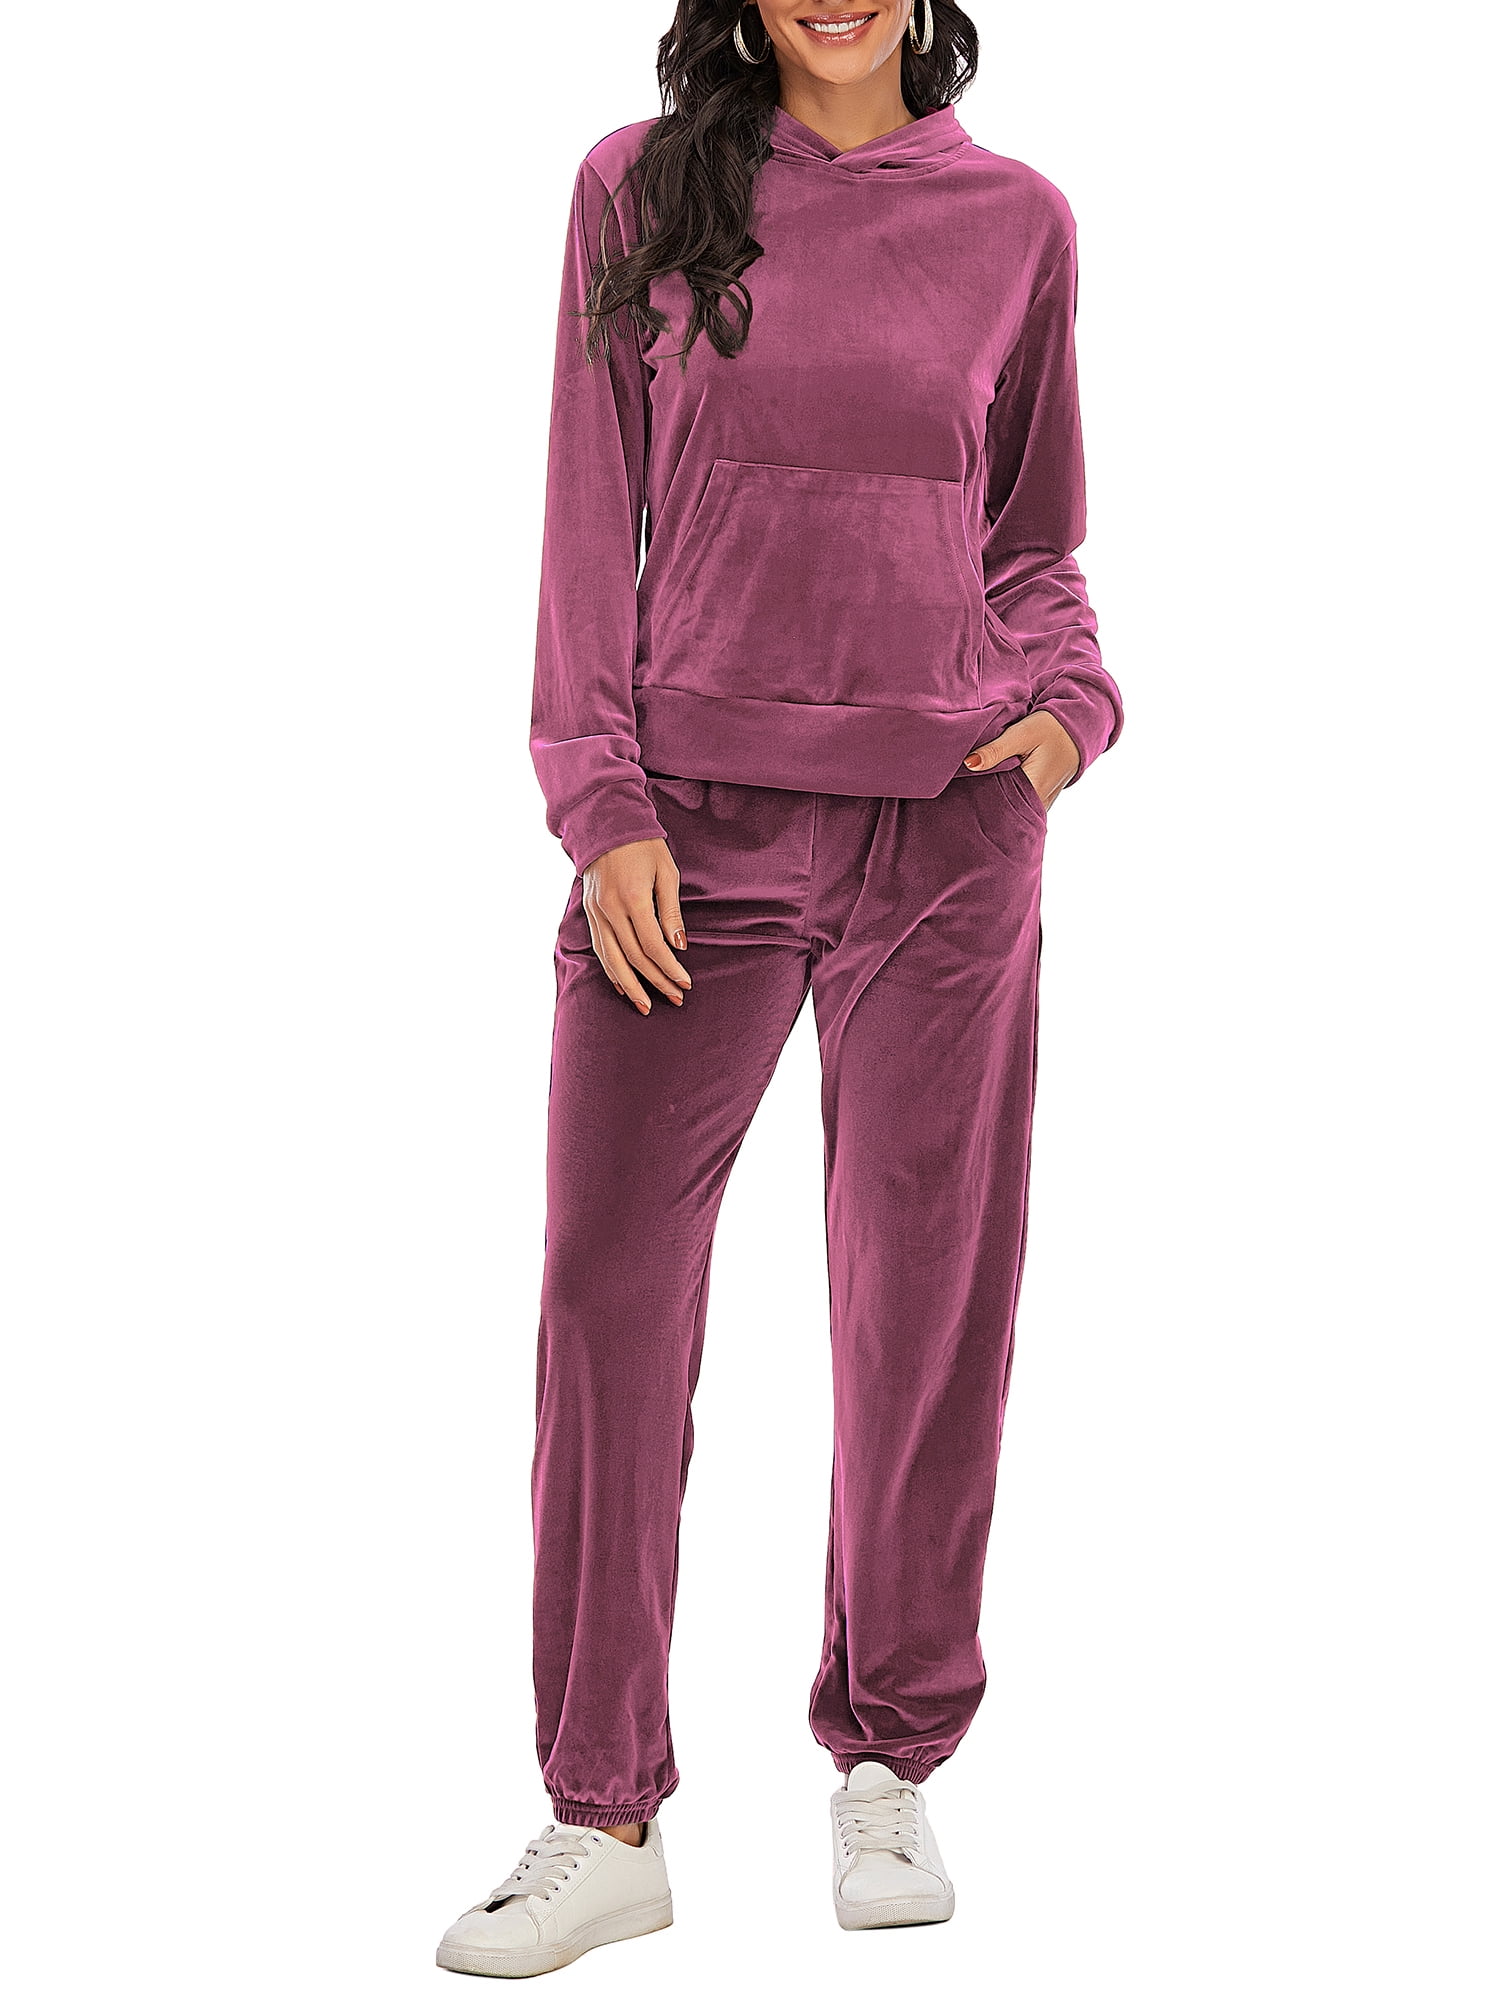 Sweatsuit Womens Long Sleeve Solid Velour Sweatsuit Set Hoodie and Pants Sport Suits Tracksuits 